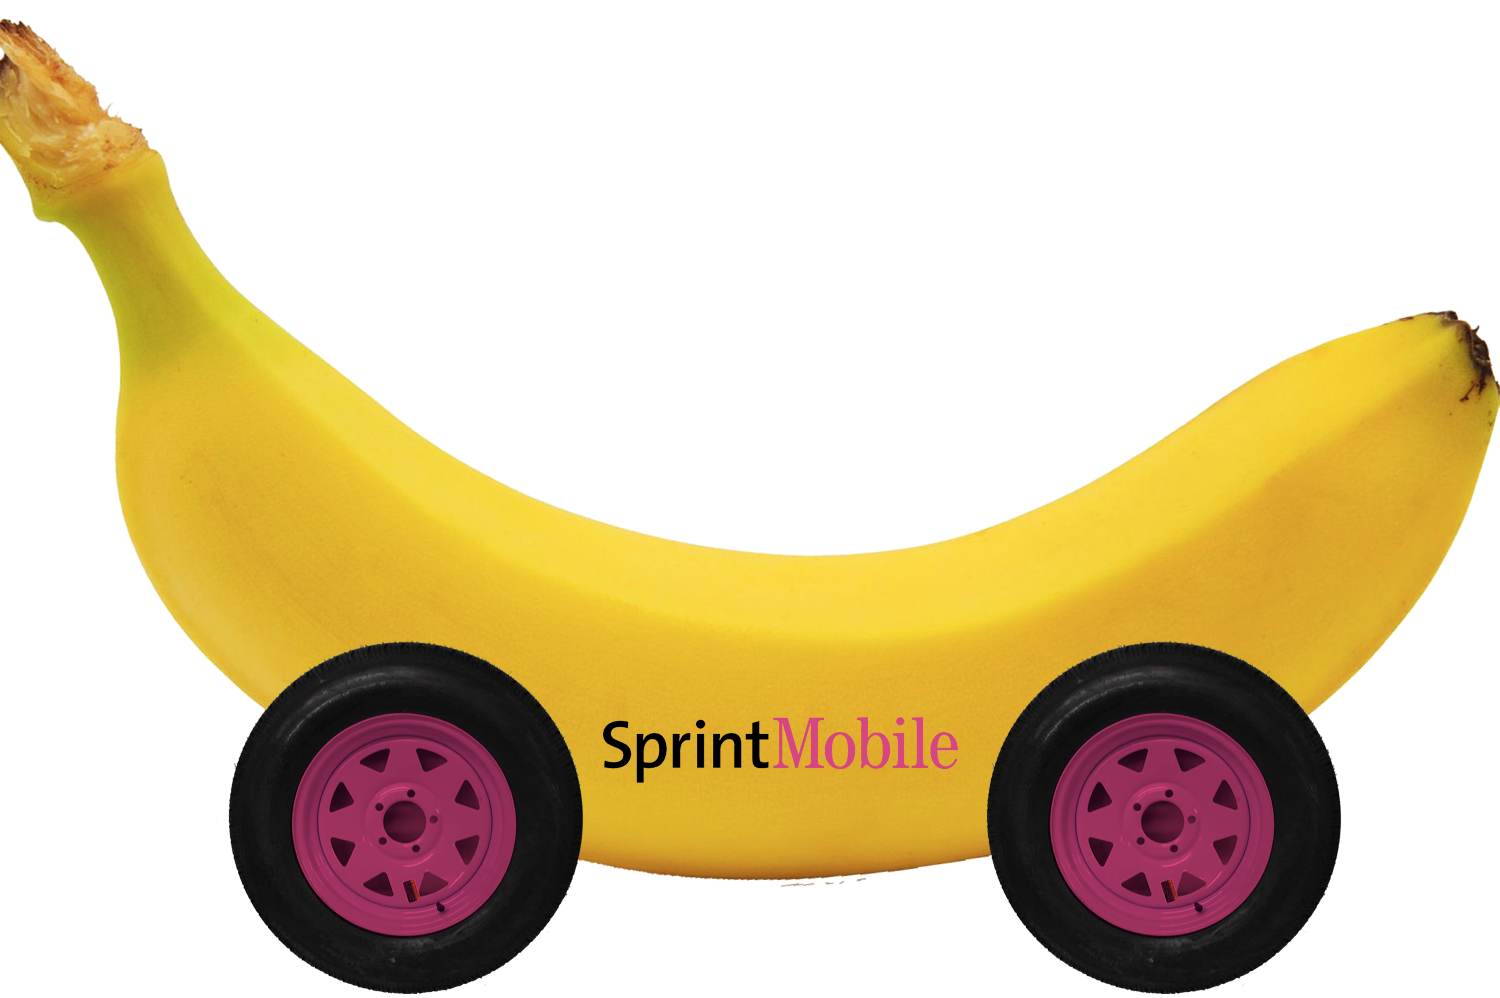 SprinT-Mobile Reportedly Closer To Being An Actual Thing